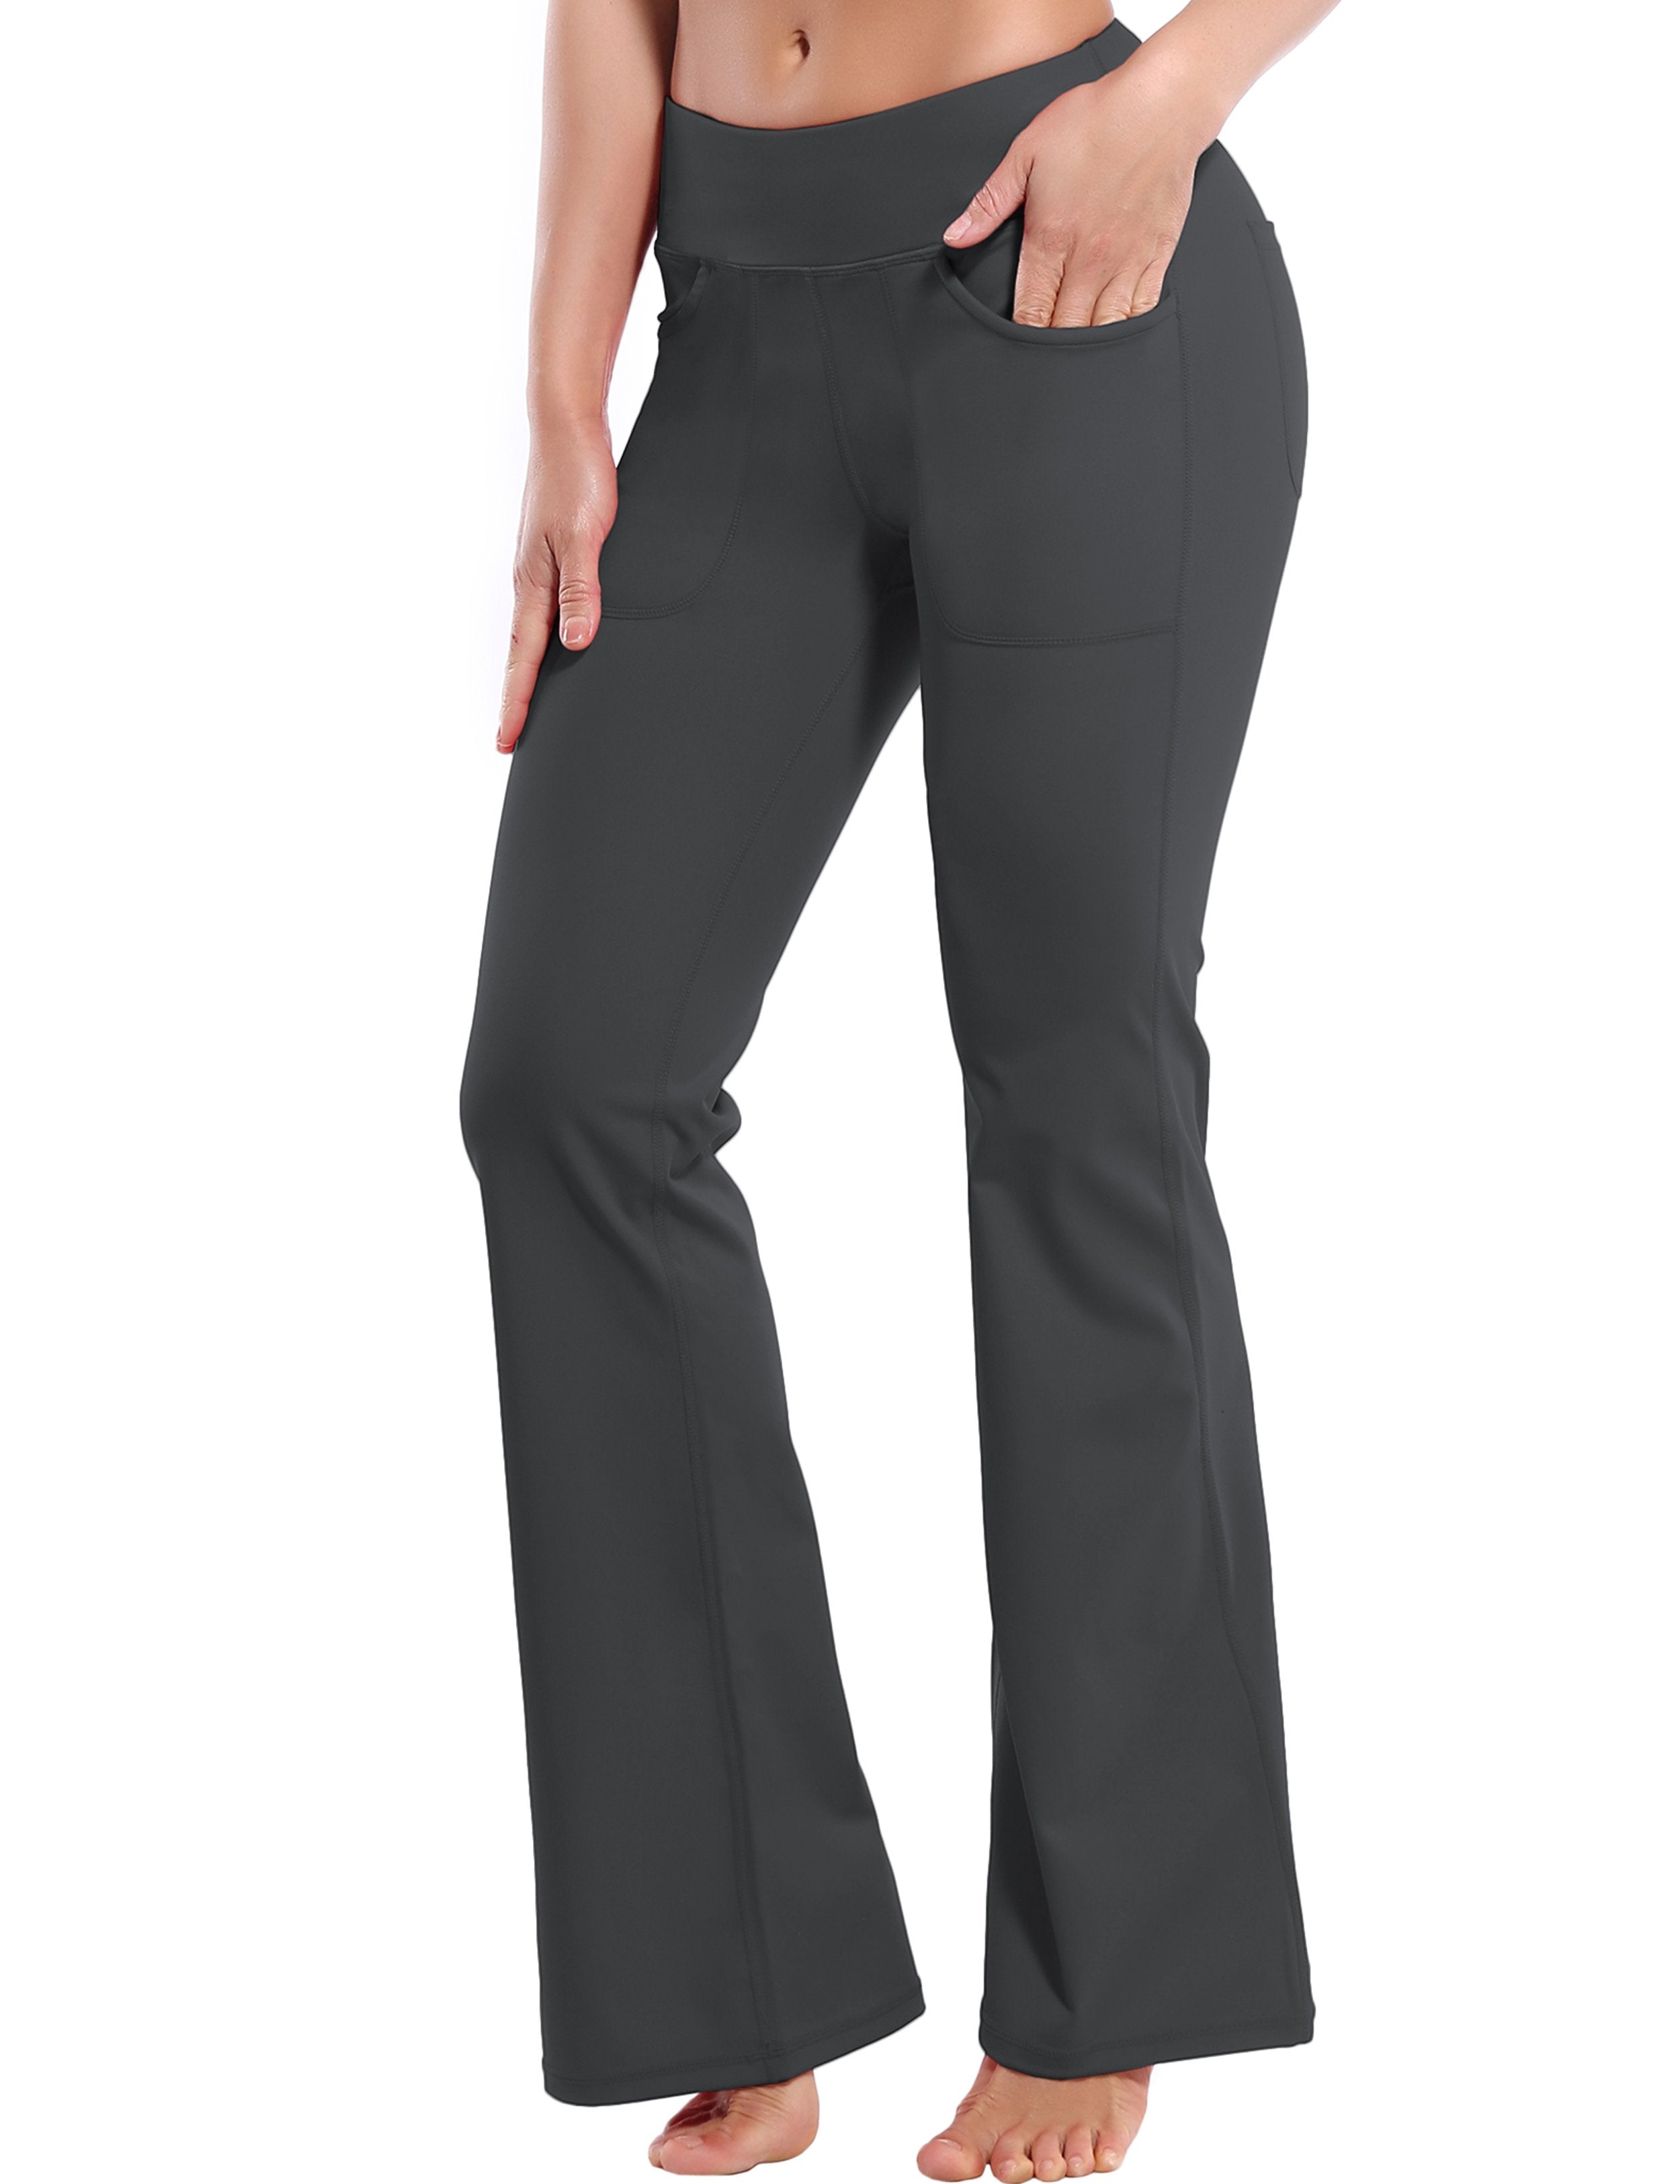 29 31 33 35 Bootcut Leggings with Pockets shadowcharcoal ins –  bubblelime